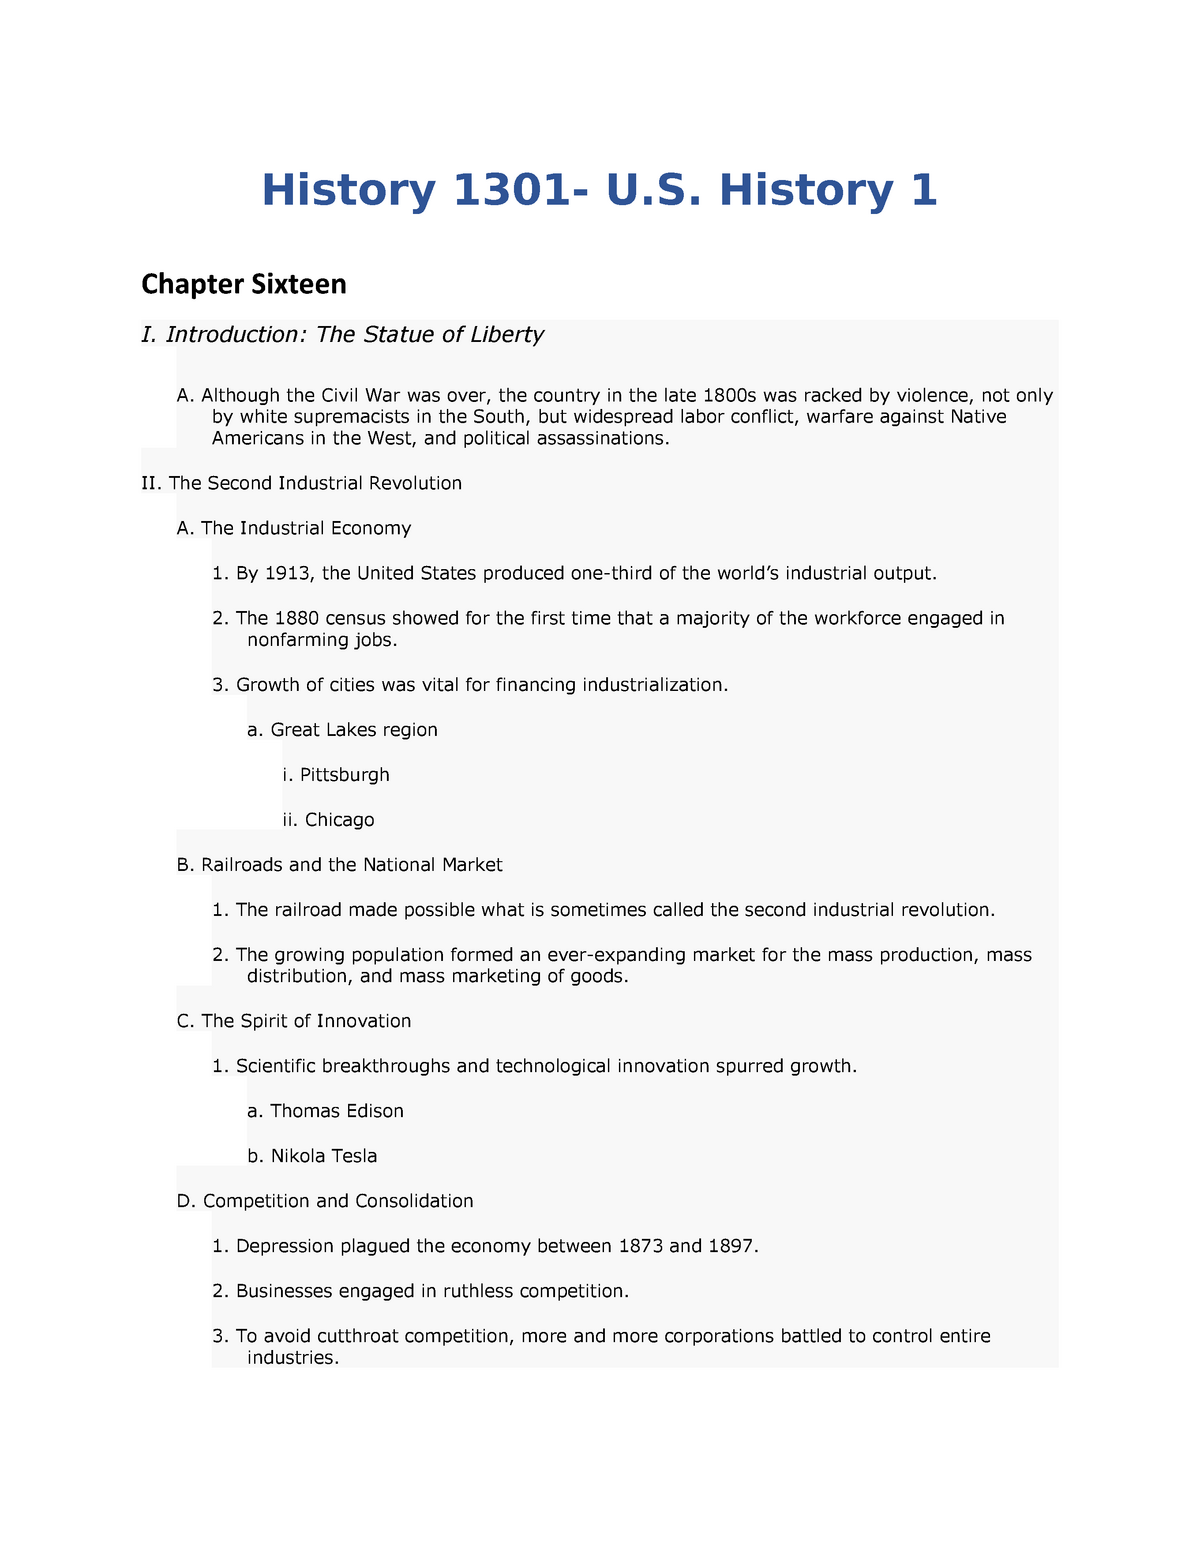 history 1301 research paper topics